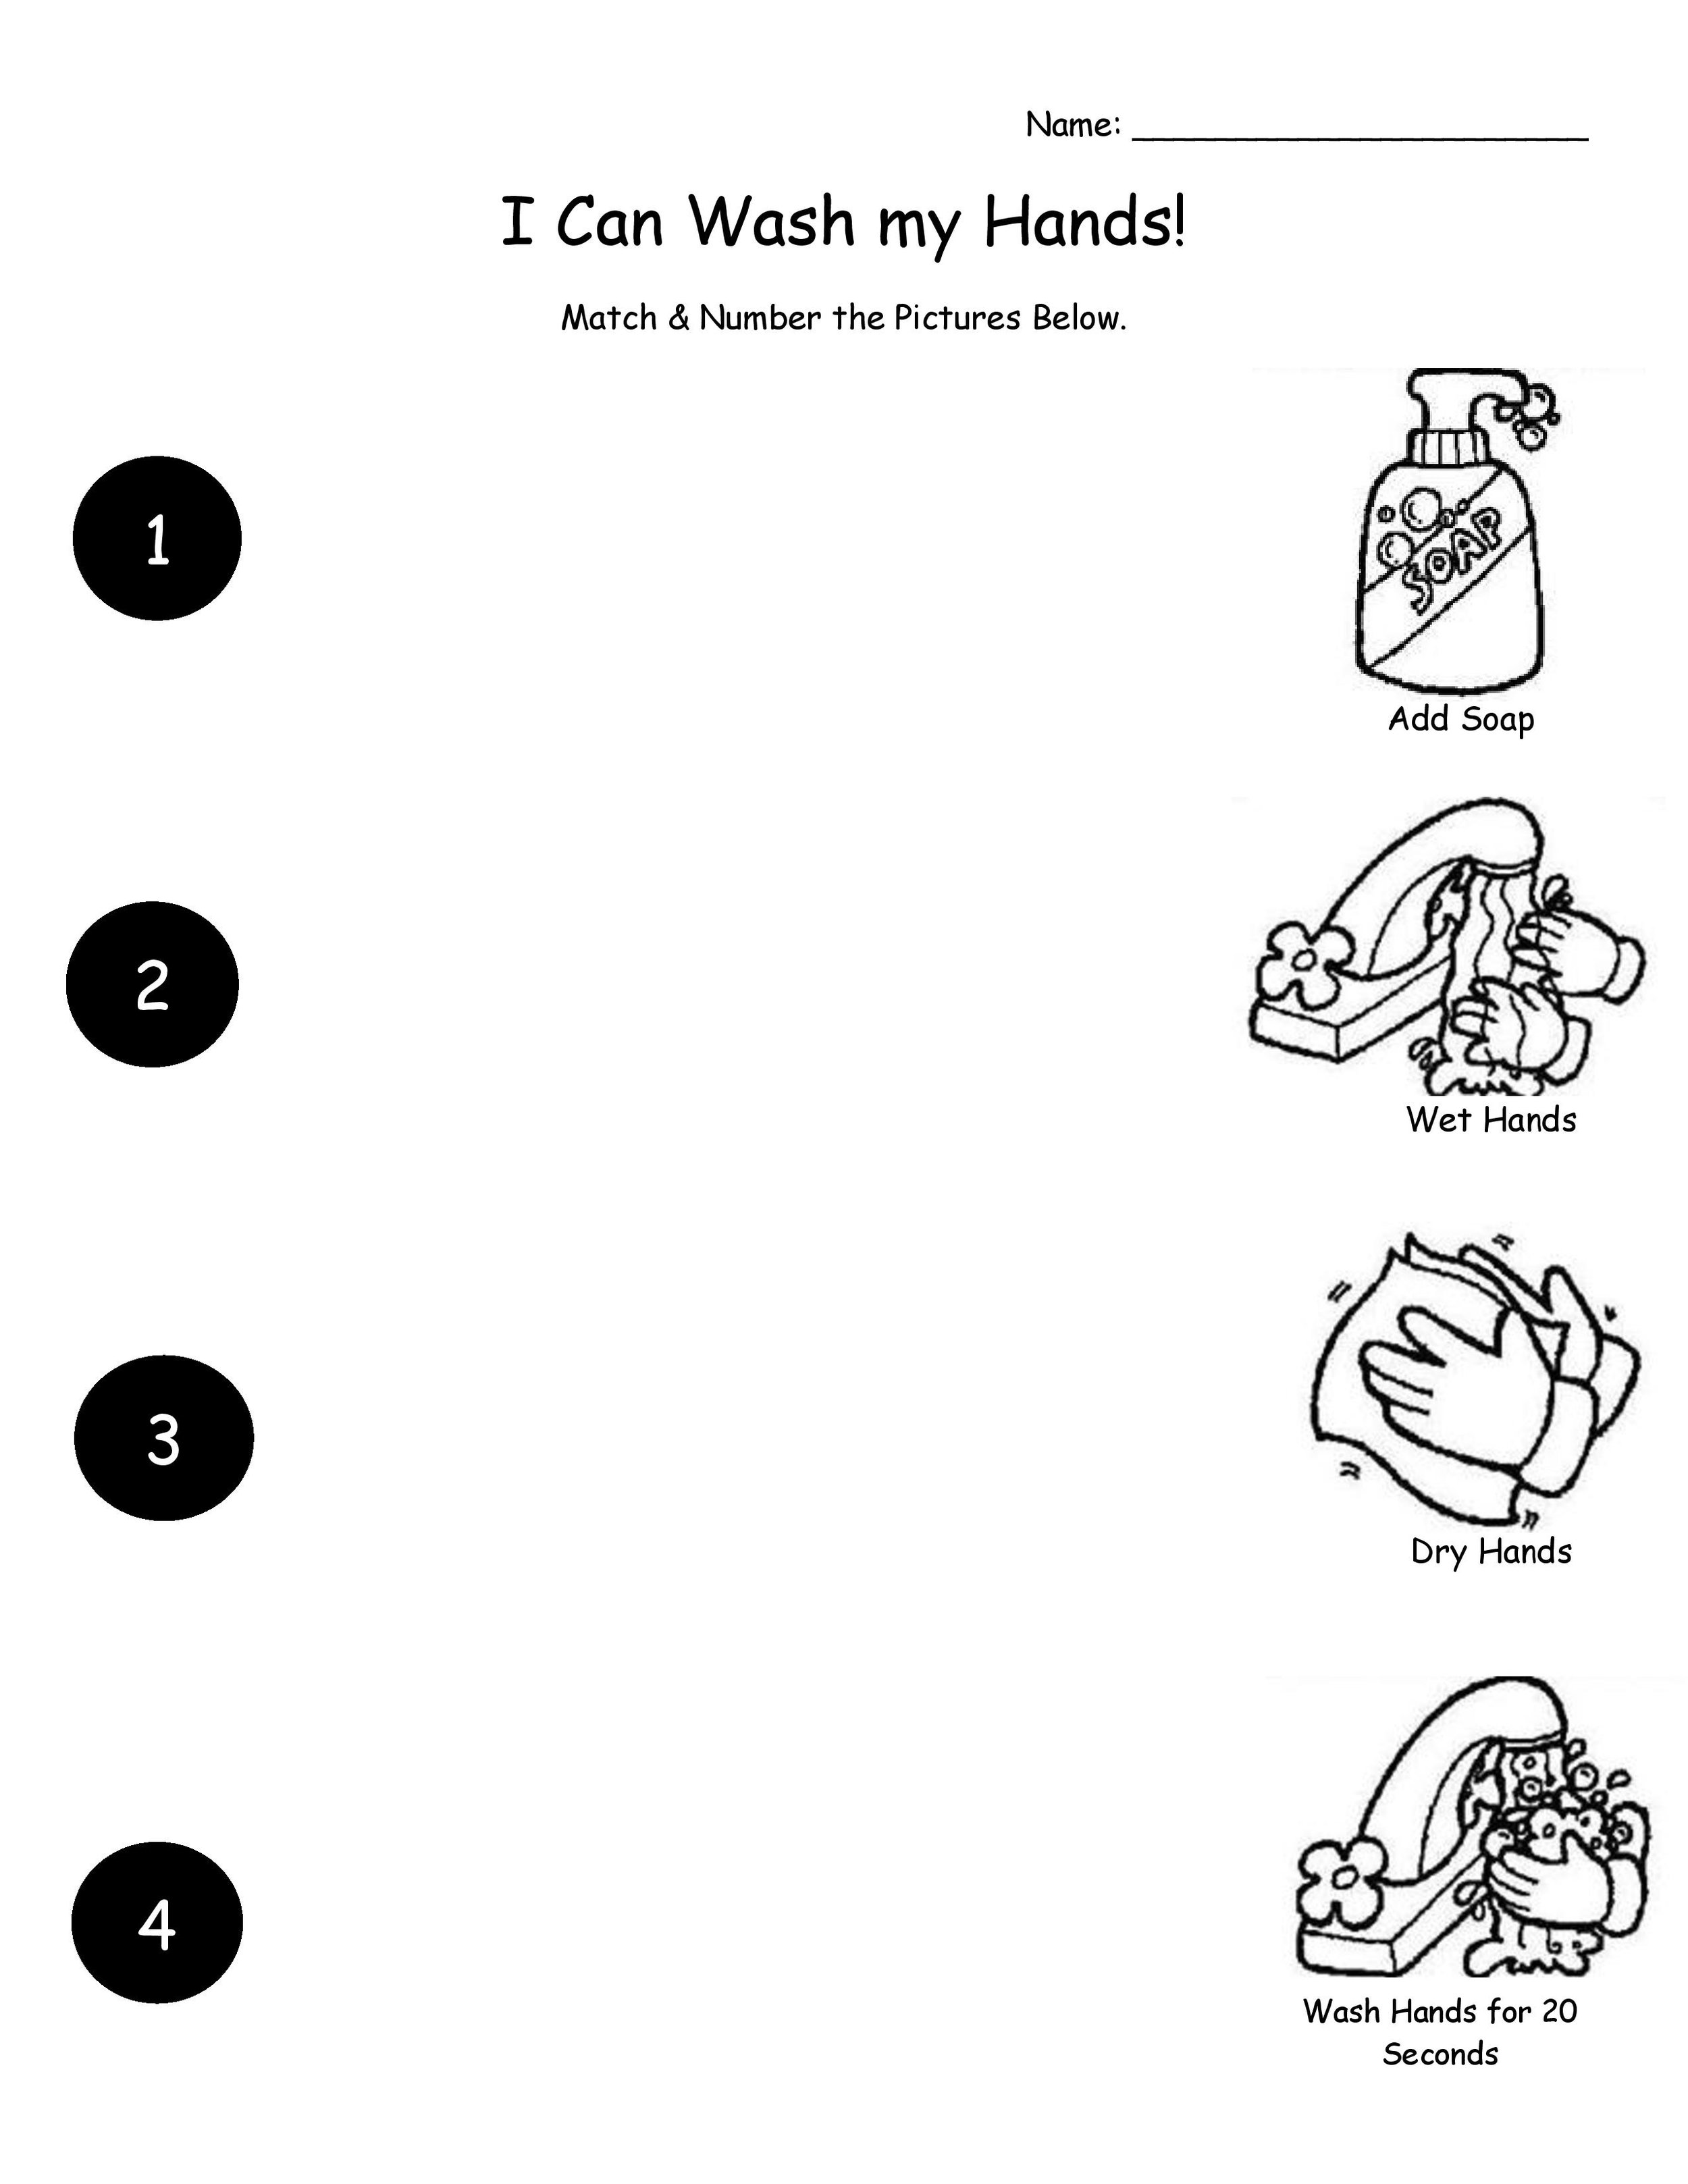 I Can Wash My Hands Matching-page-001.jpg